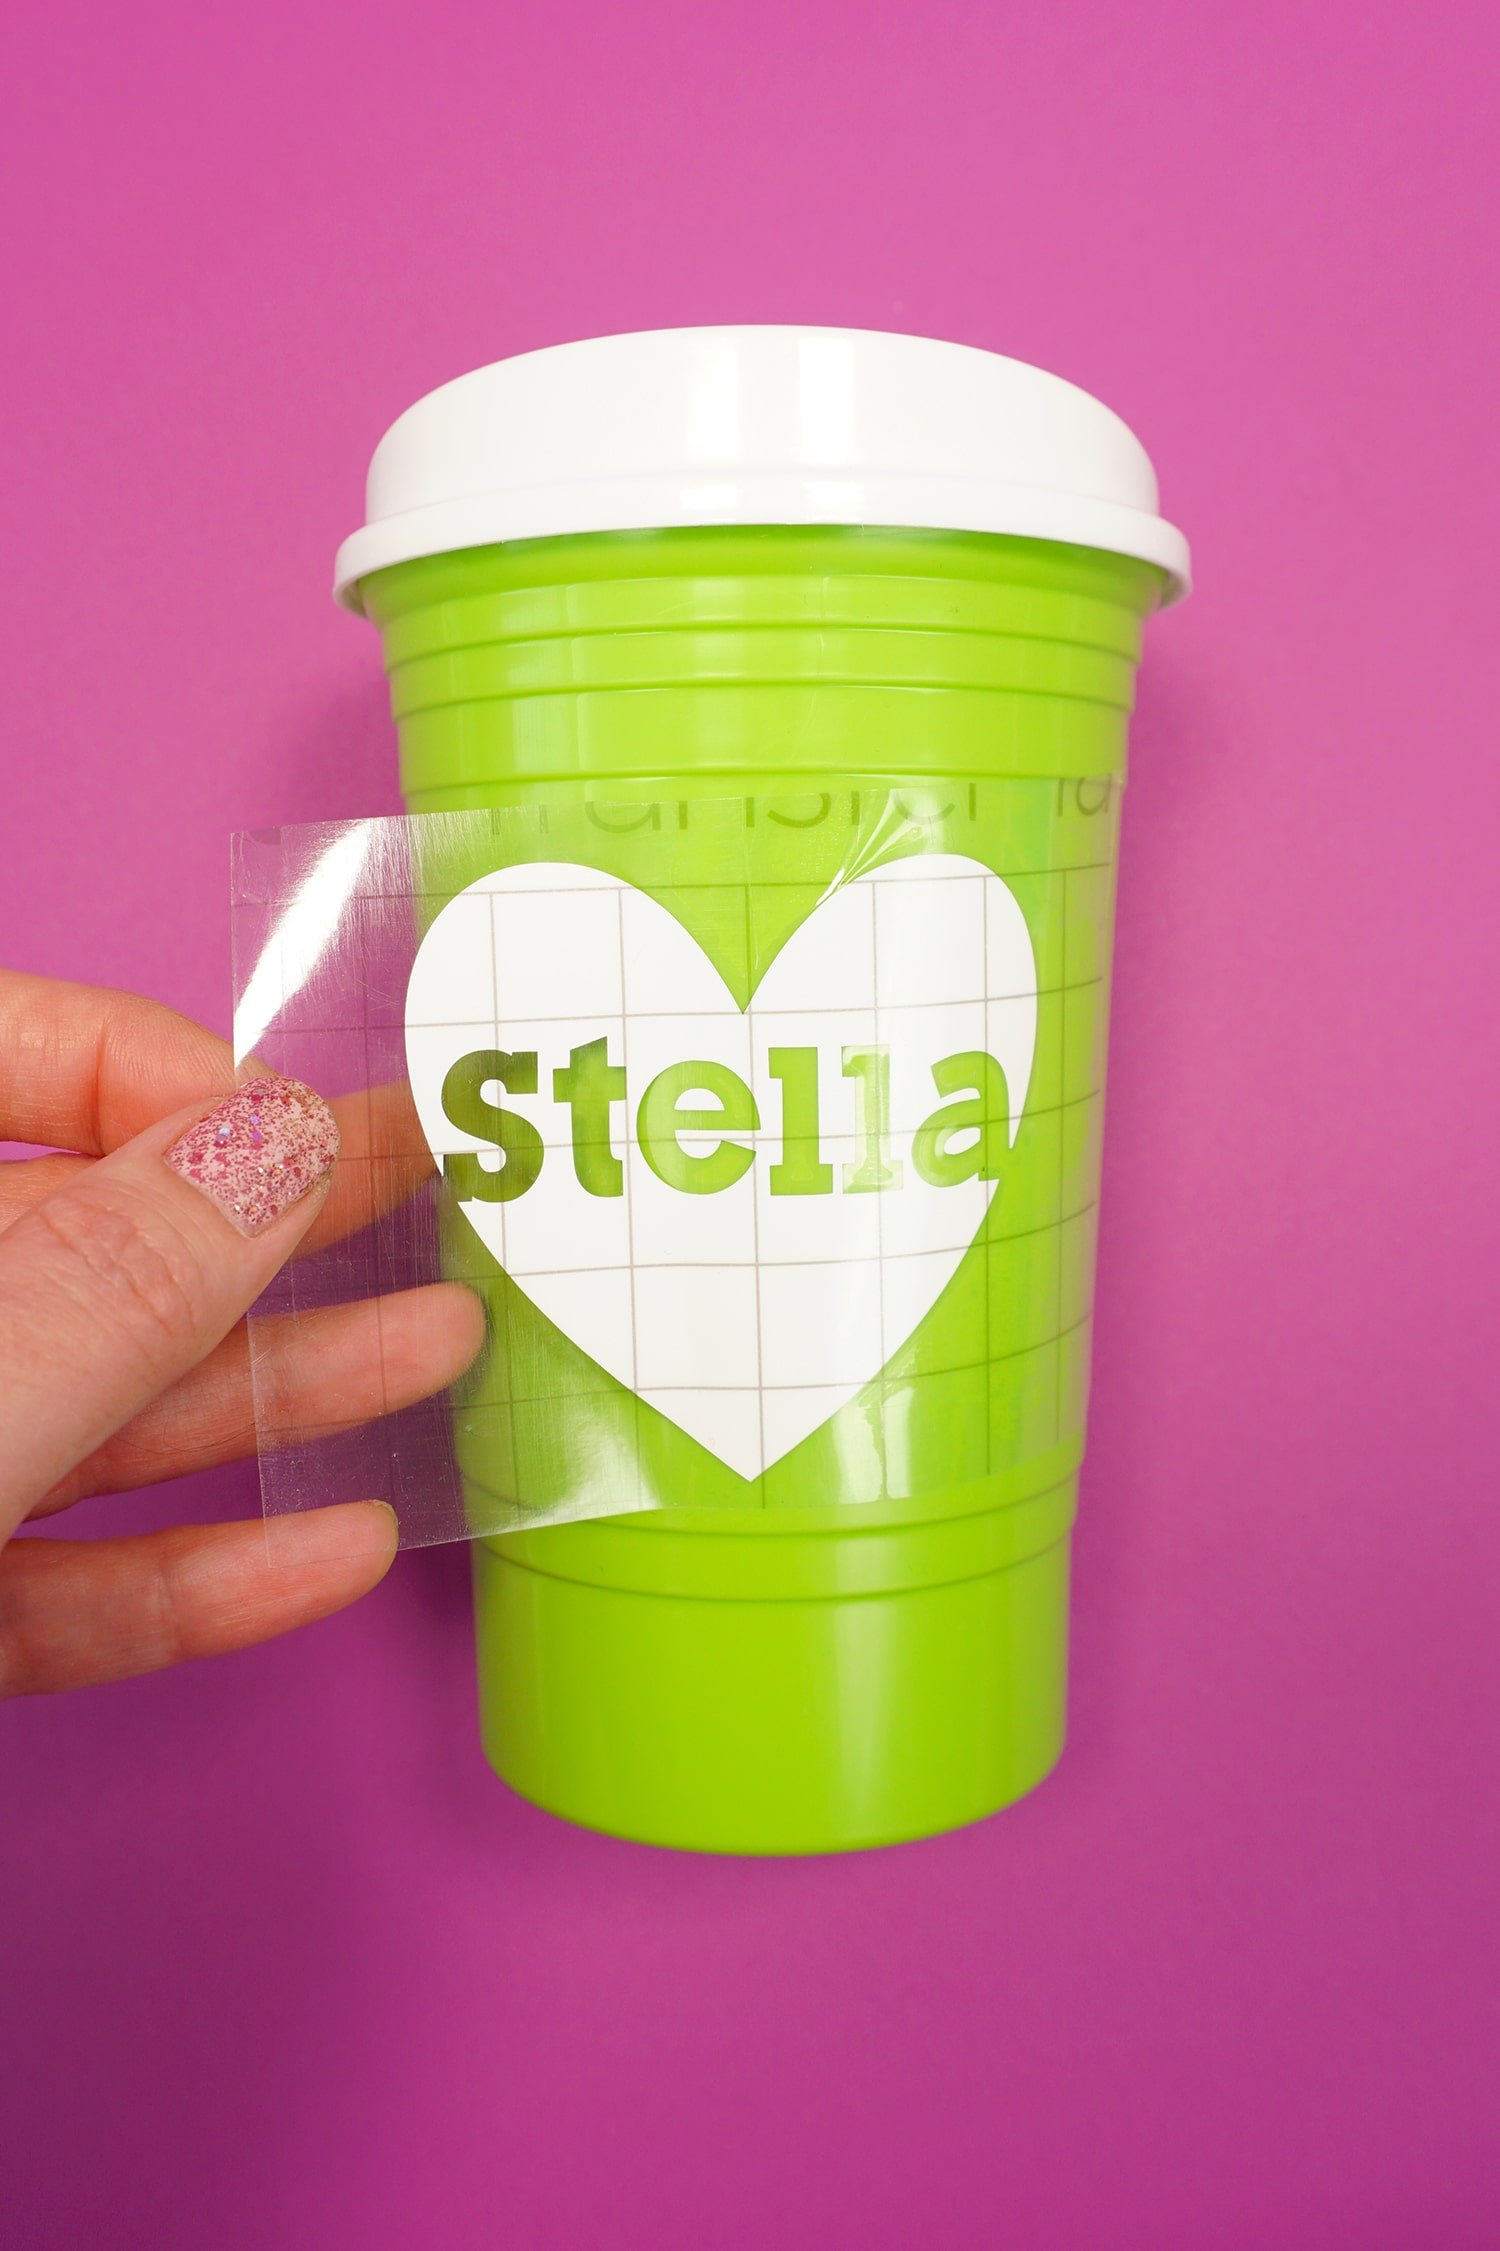 peeling and revealing personalized name Stella on white heart design on party cup